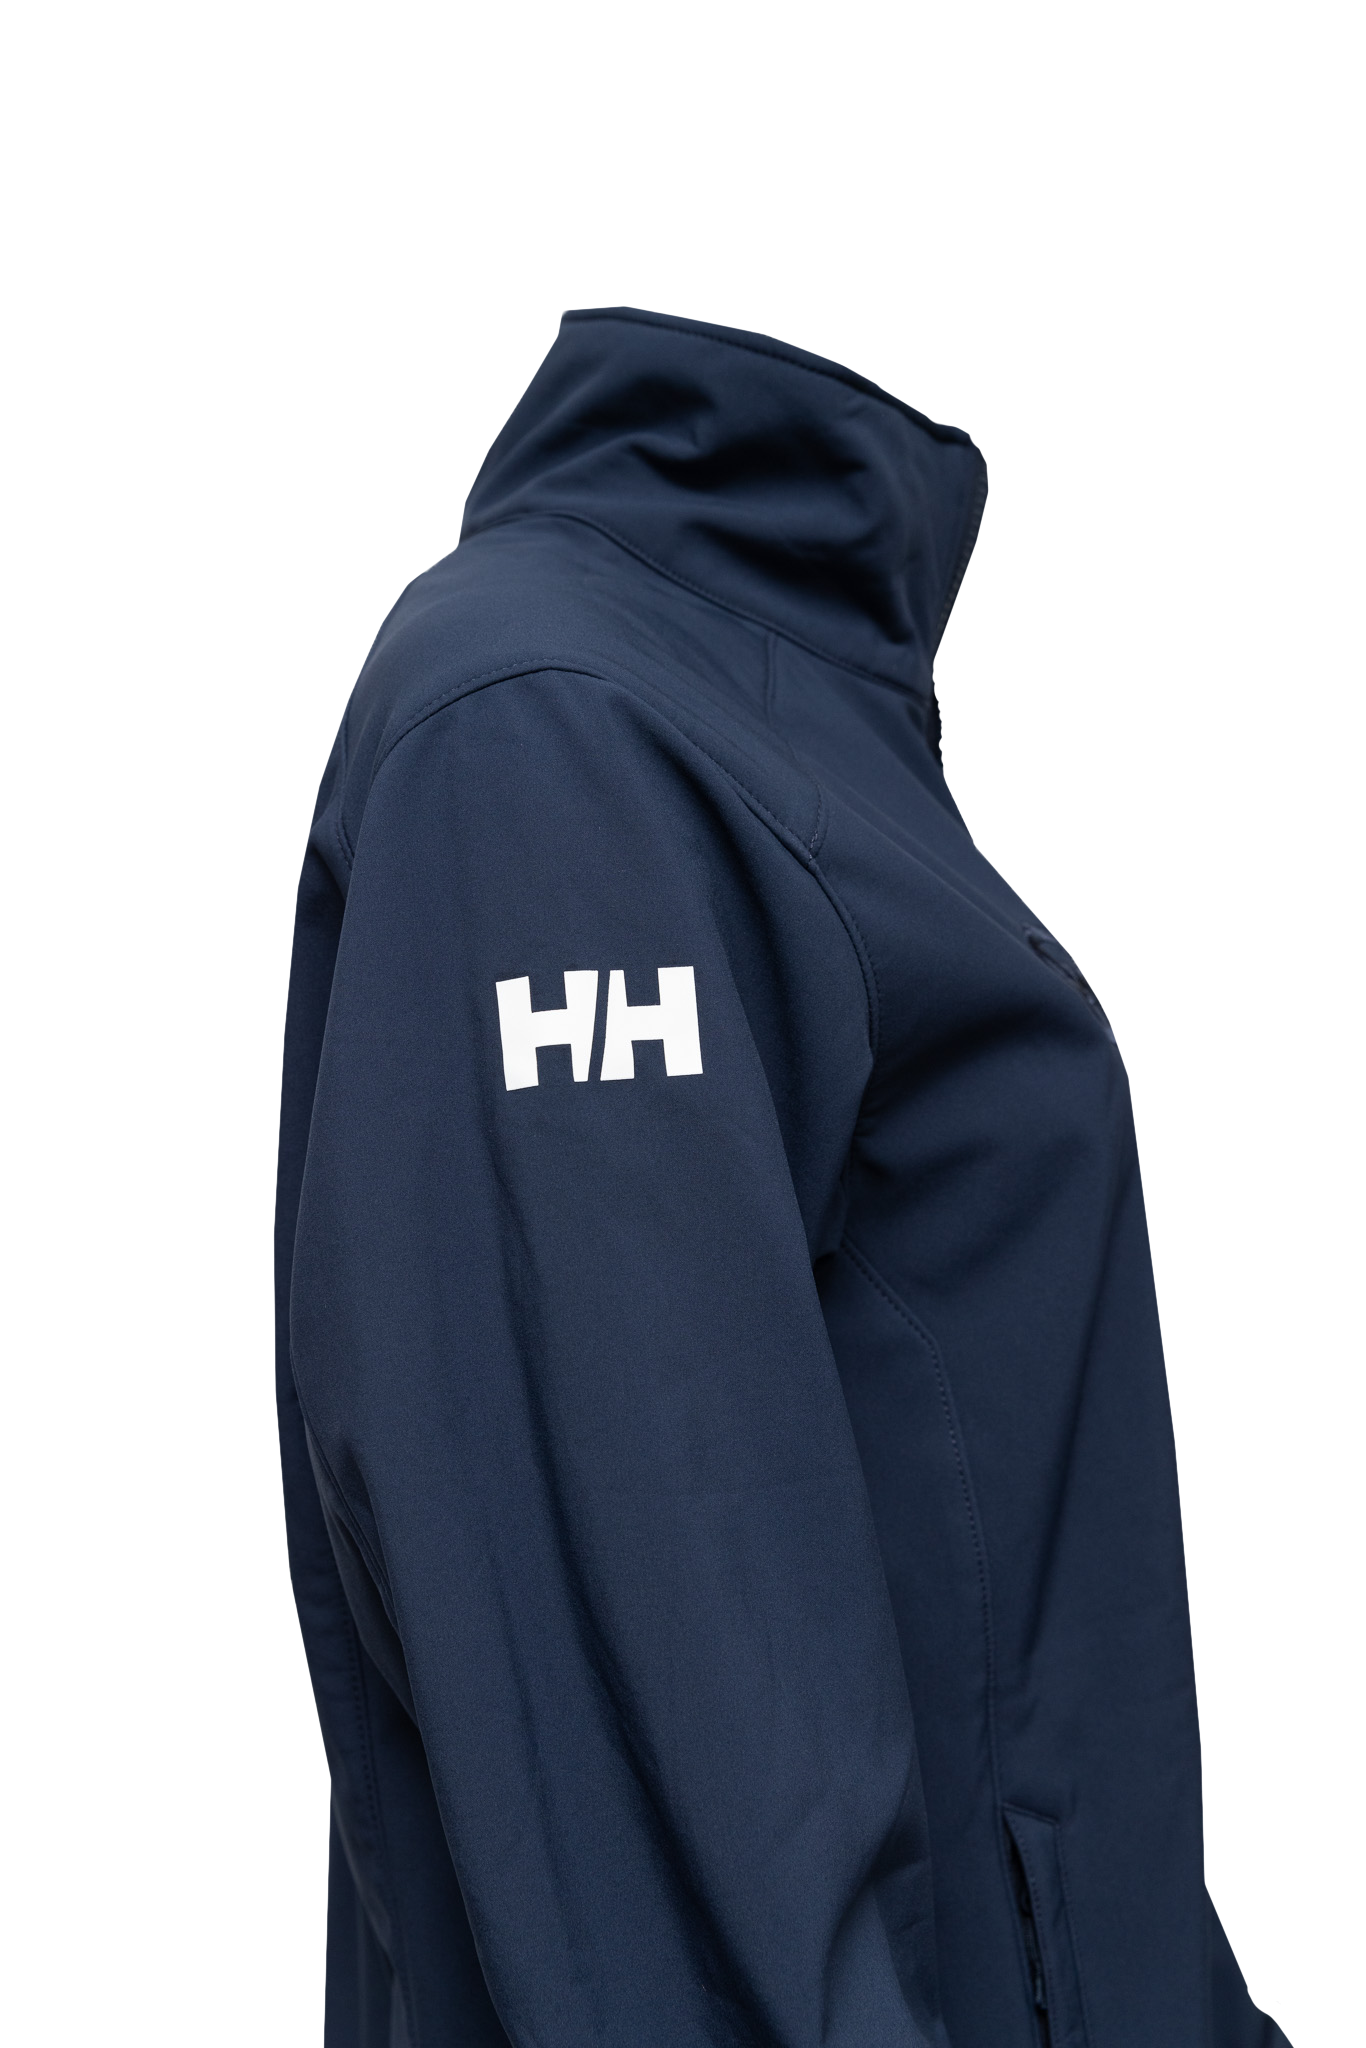 Women's Paramount Soft Shell Jacket by Helly Hansen